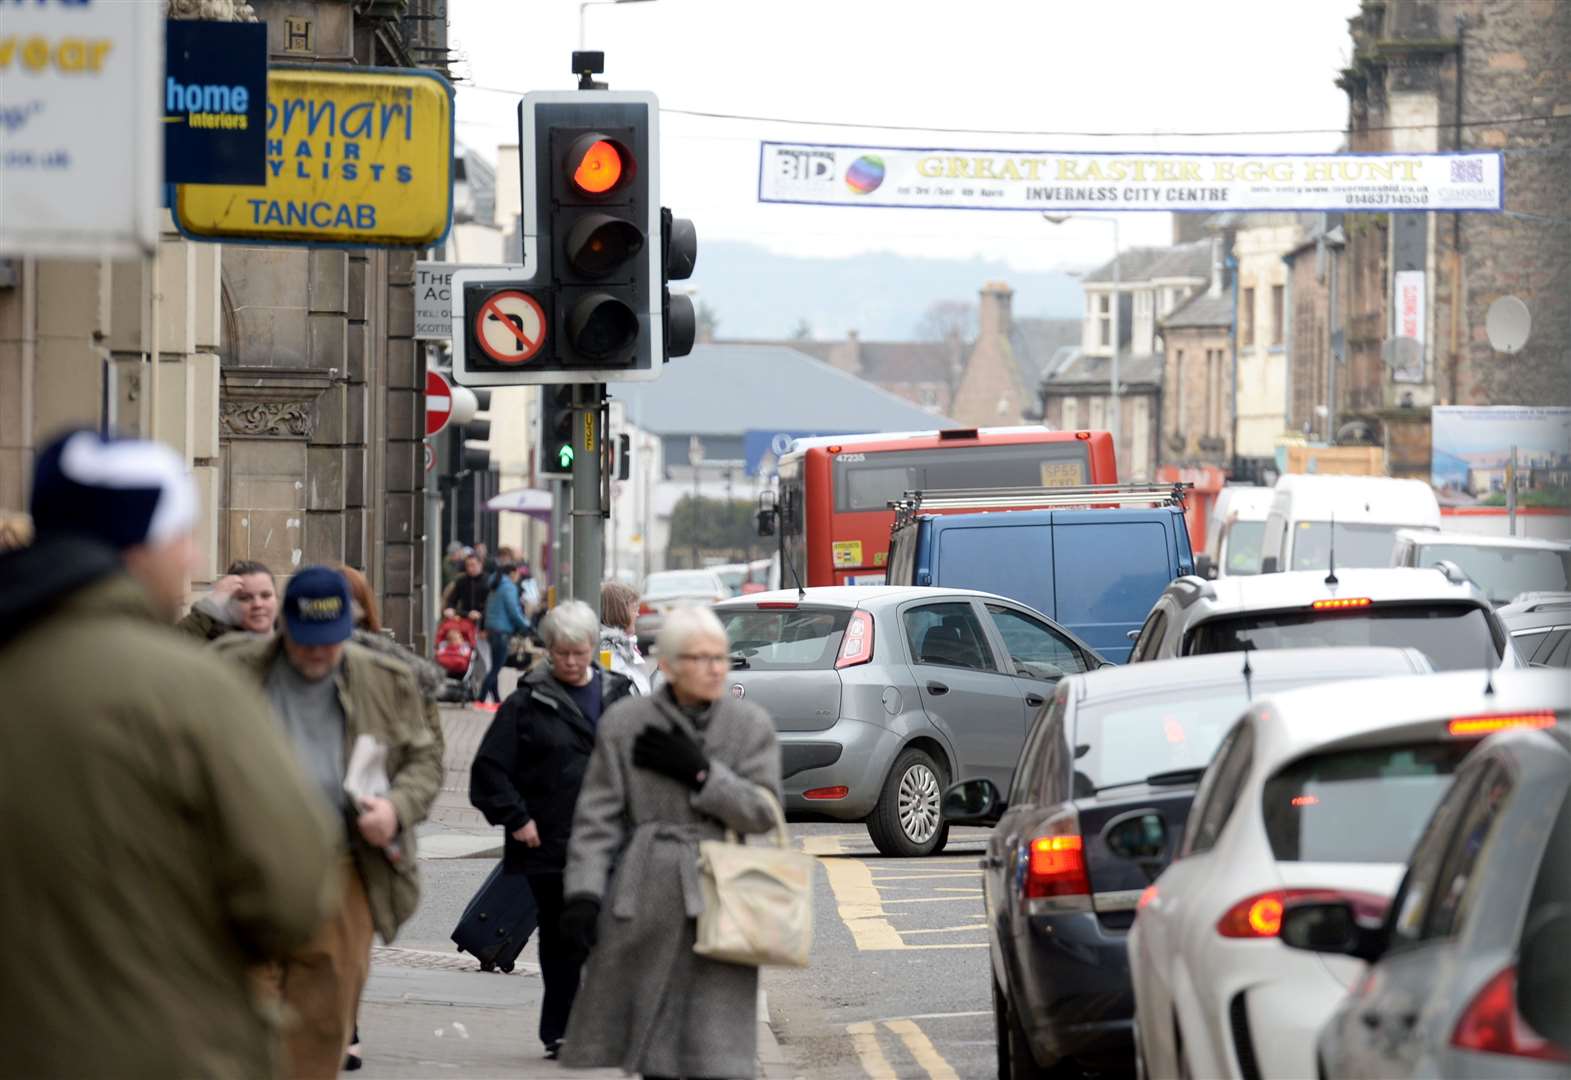 Academy Street could be closed to traffic in the evenings under new proposal.